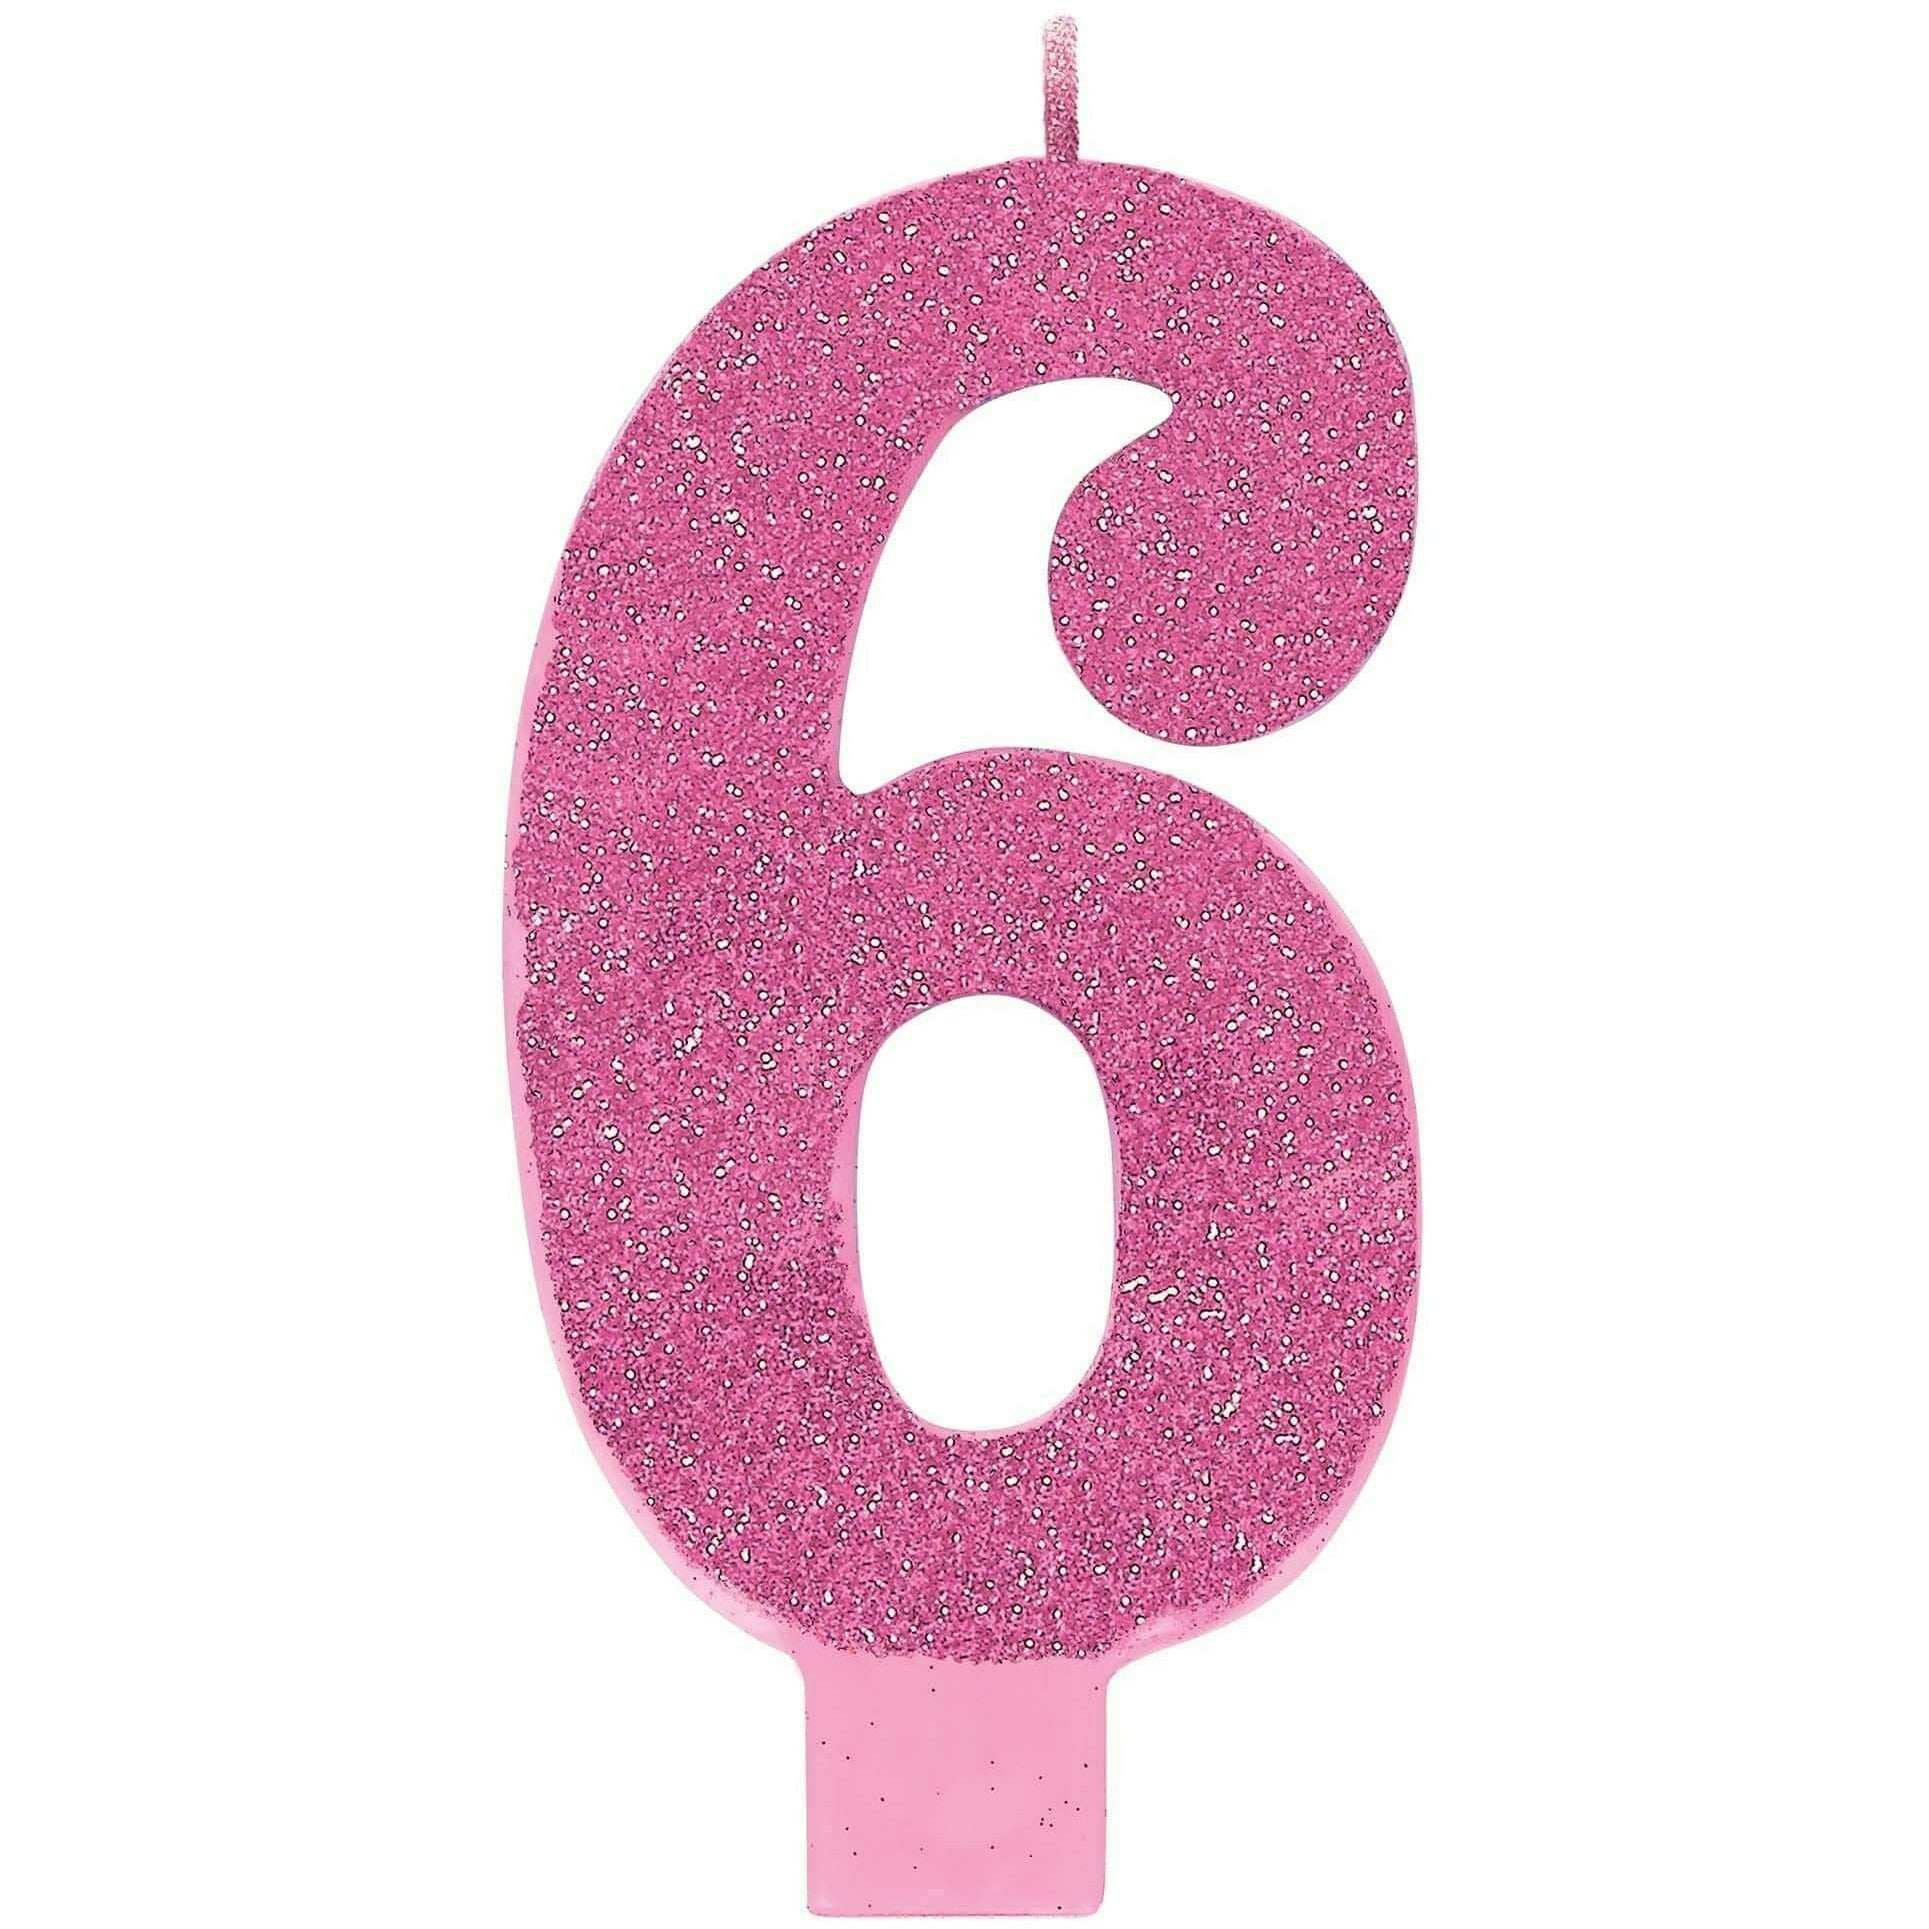 Amscan CANDLES Numeral #6 Large Glitter Candle - Pink